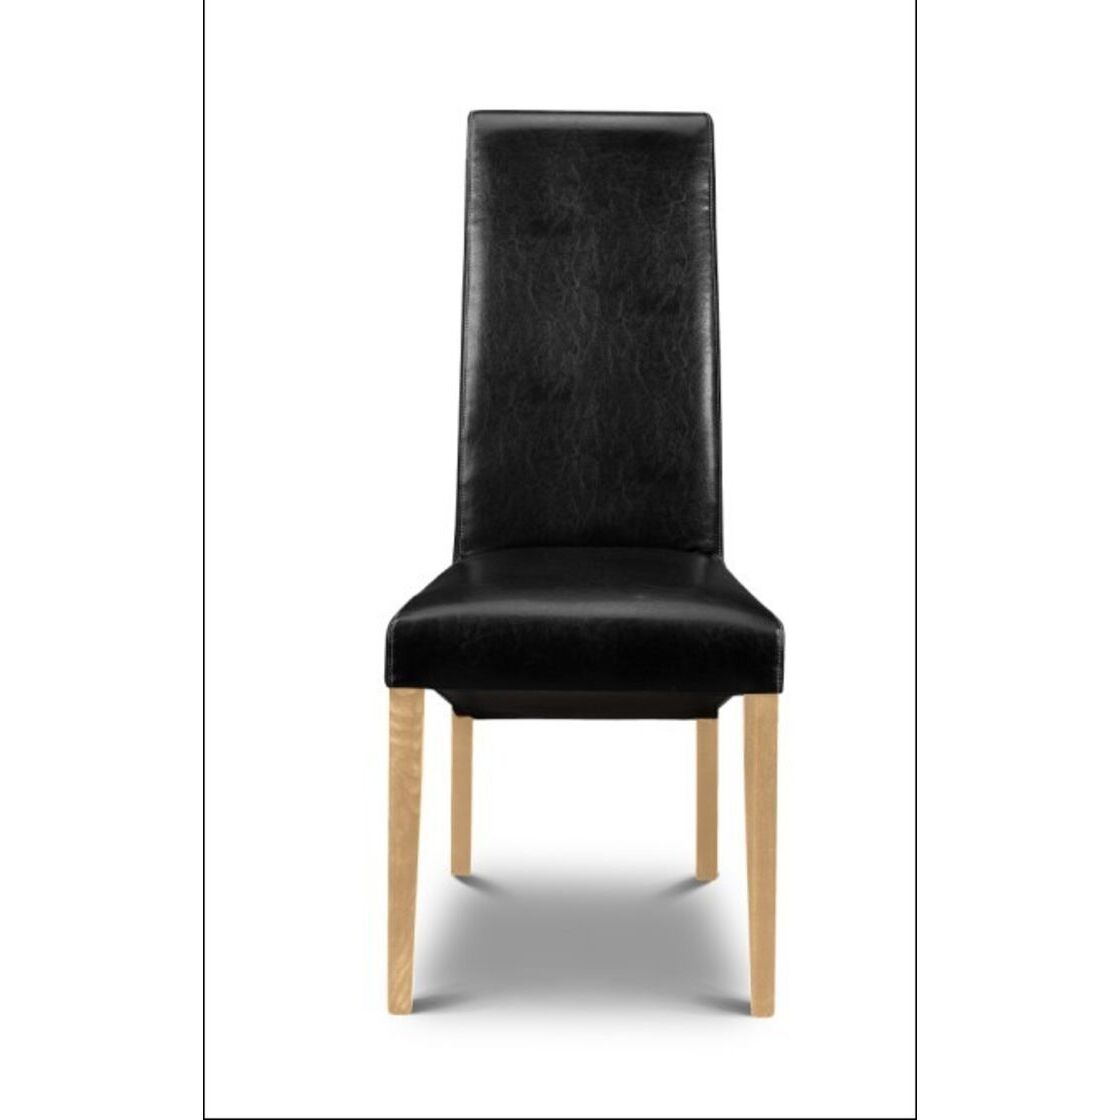 Black Dining Chairs Leather Off 69, Black Leather Dining Chairs